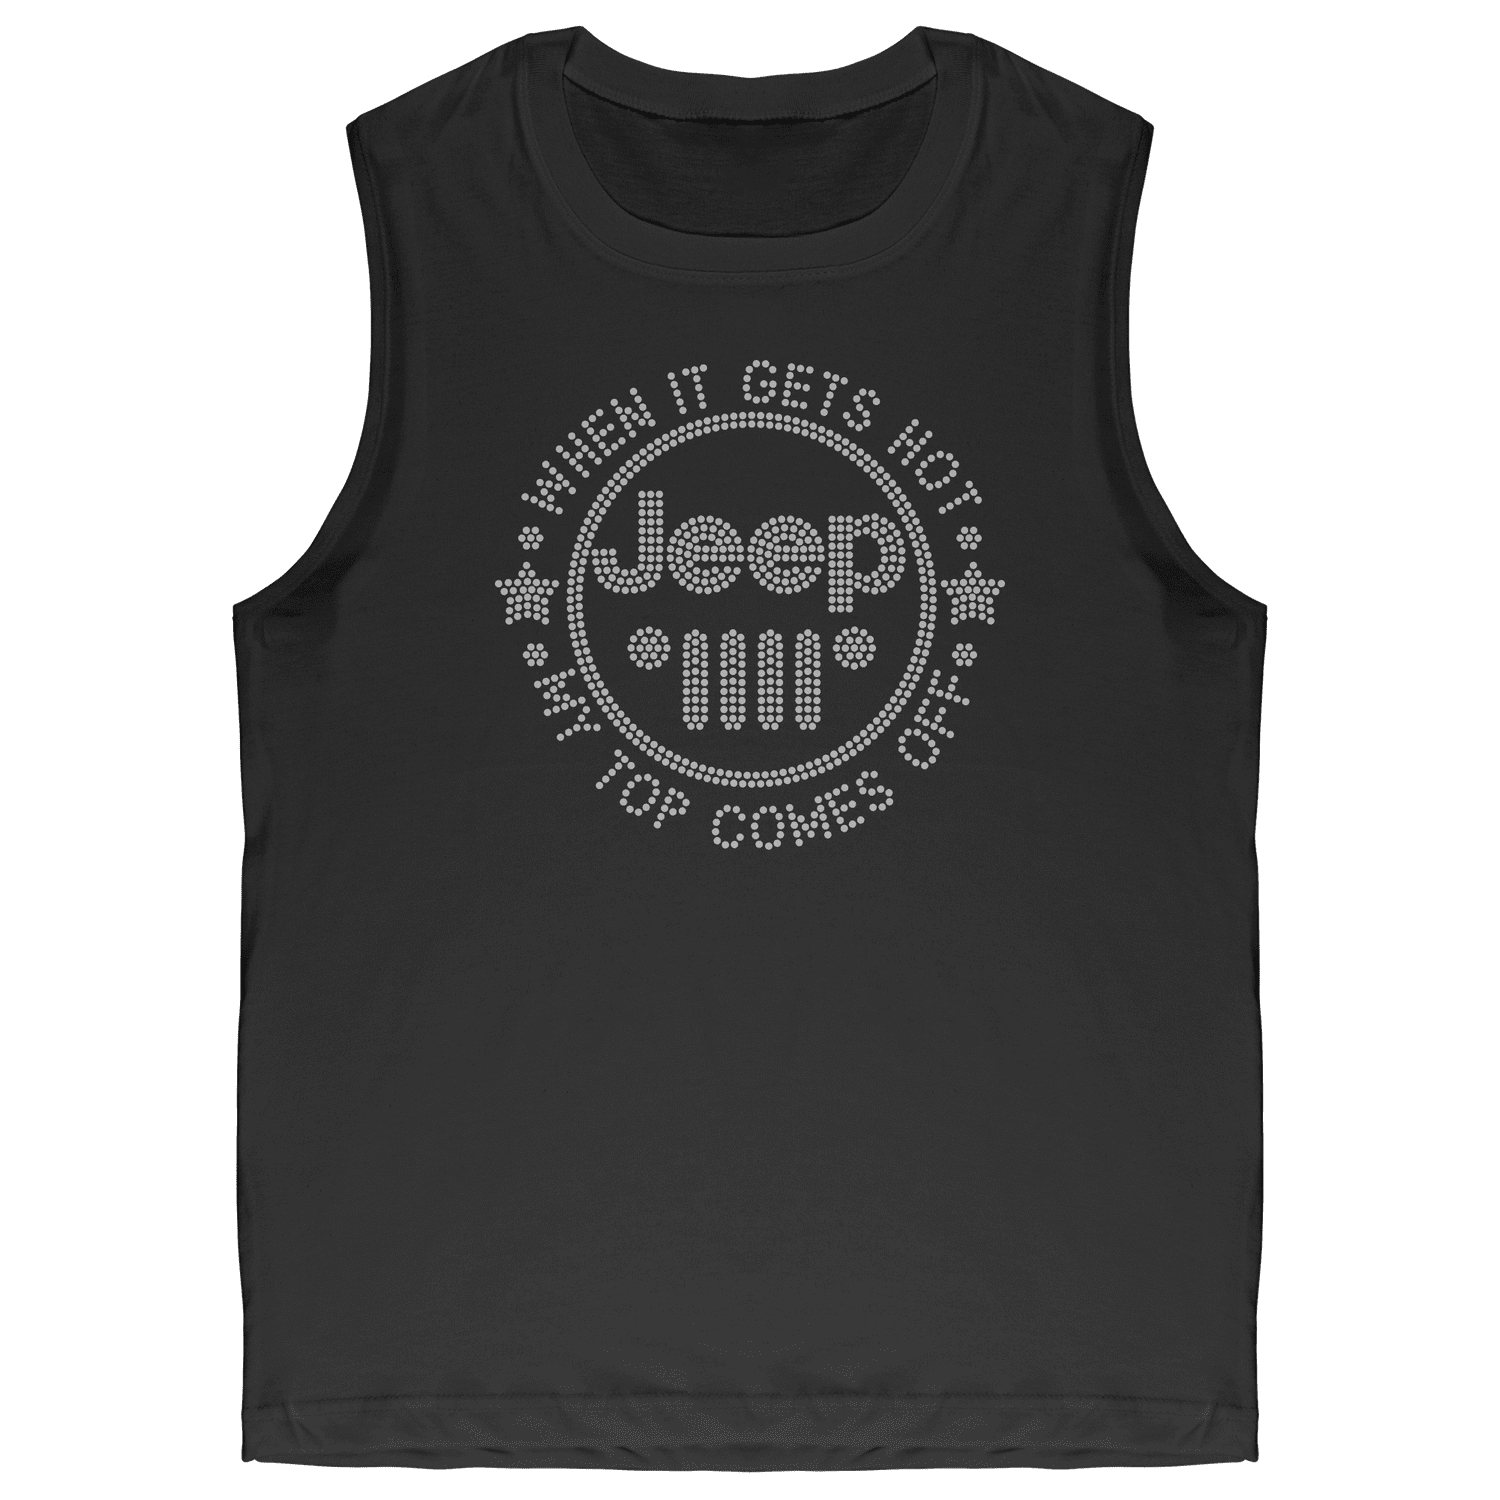 Topless Rhinestone Offroad Grill Tee Shirt Crew Neck, V Neck, Tank Top